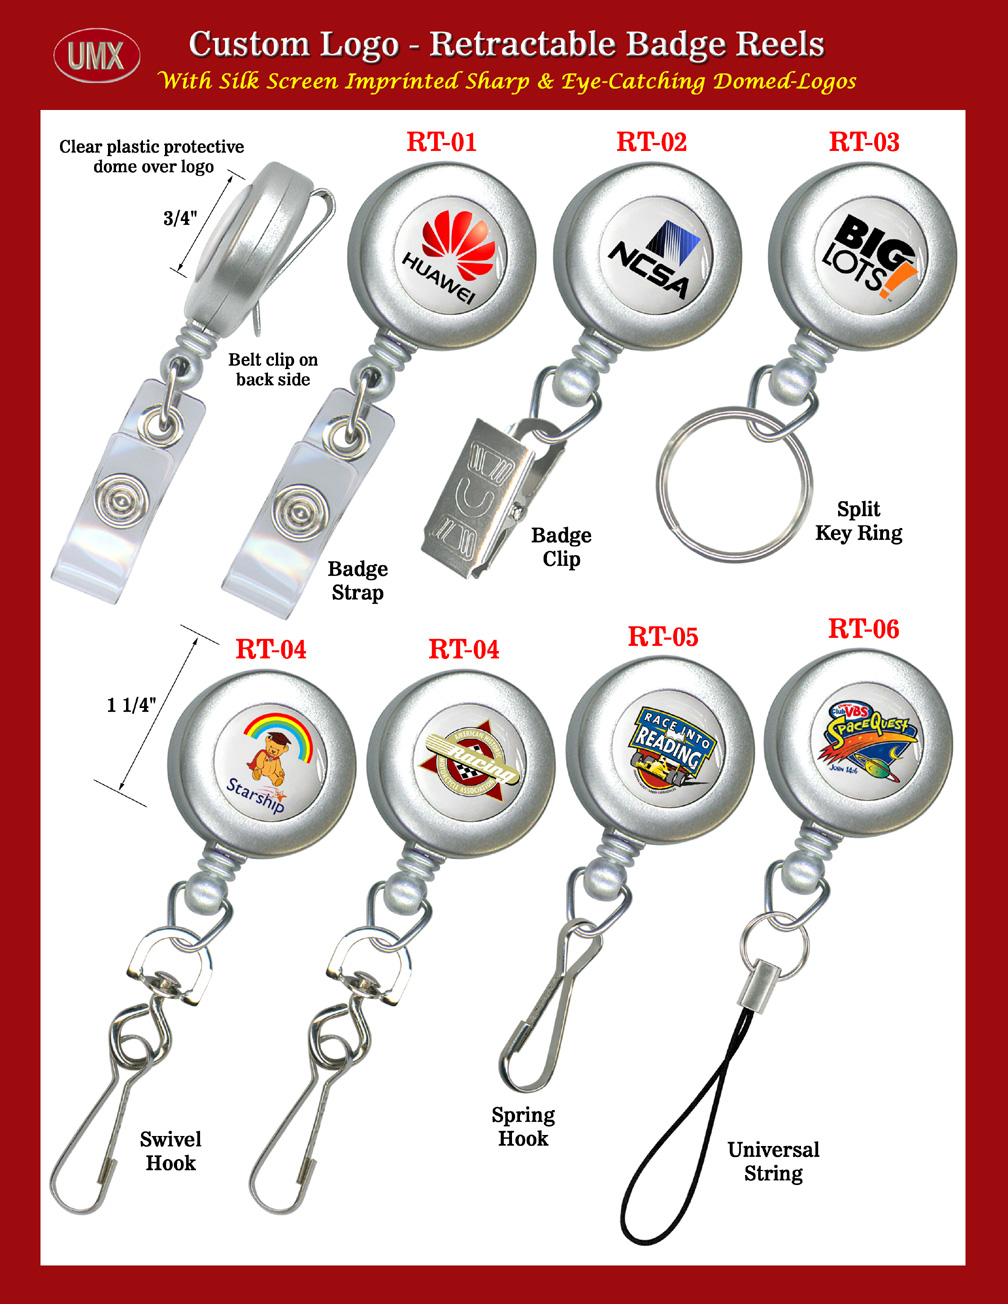 Metallic Silver Retractable Badges With Great Custom Designed Themes.